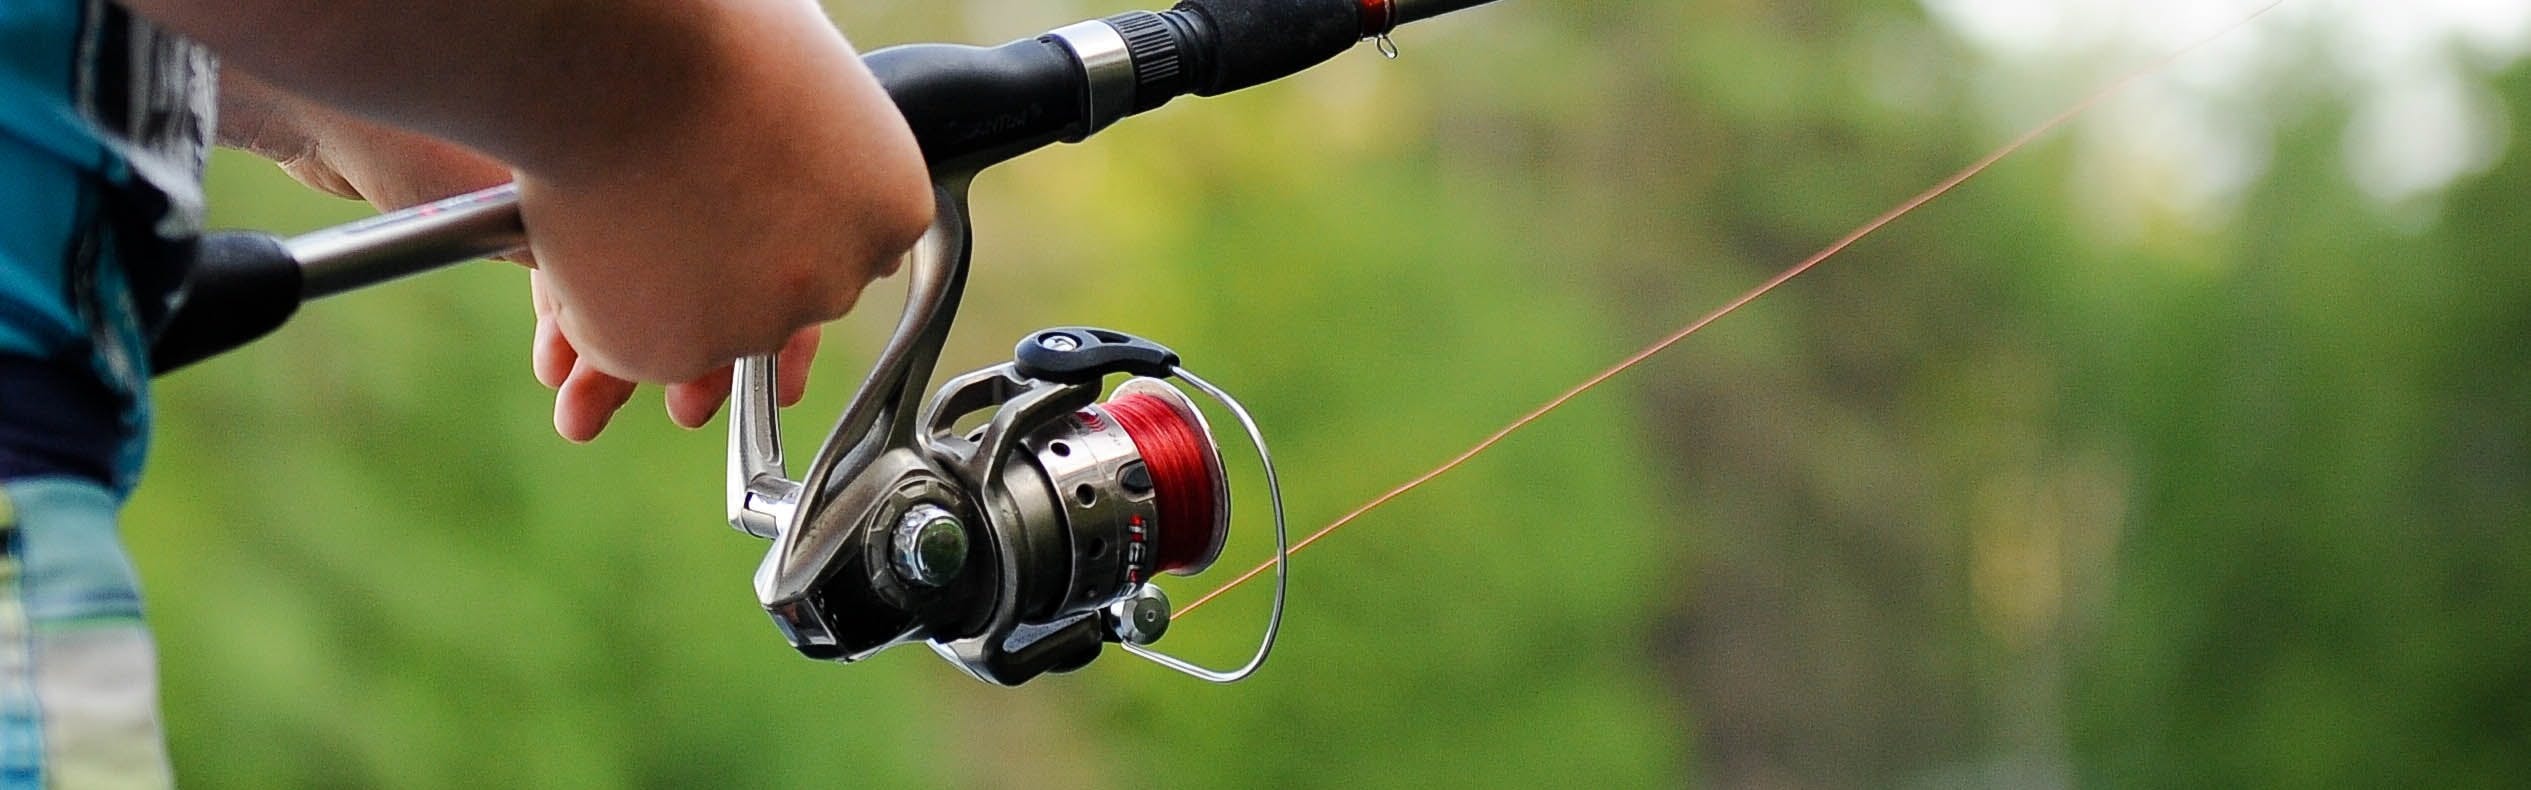 MOJO INSHORE SPINNING RODS - St. Croix Rod